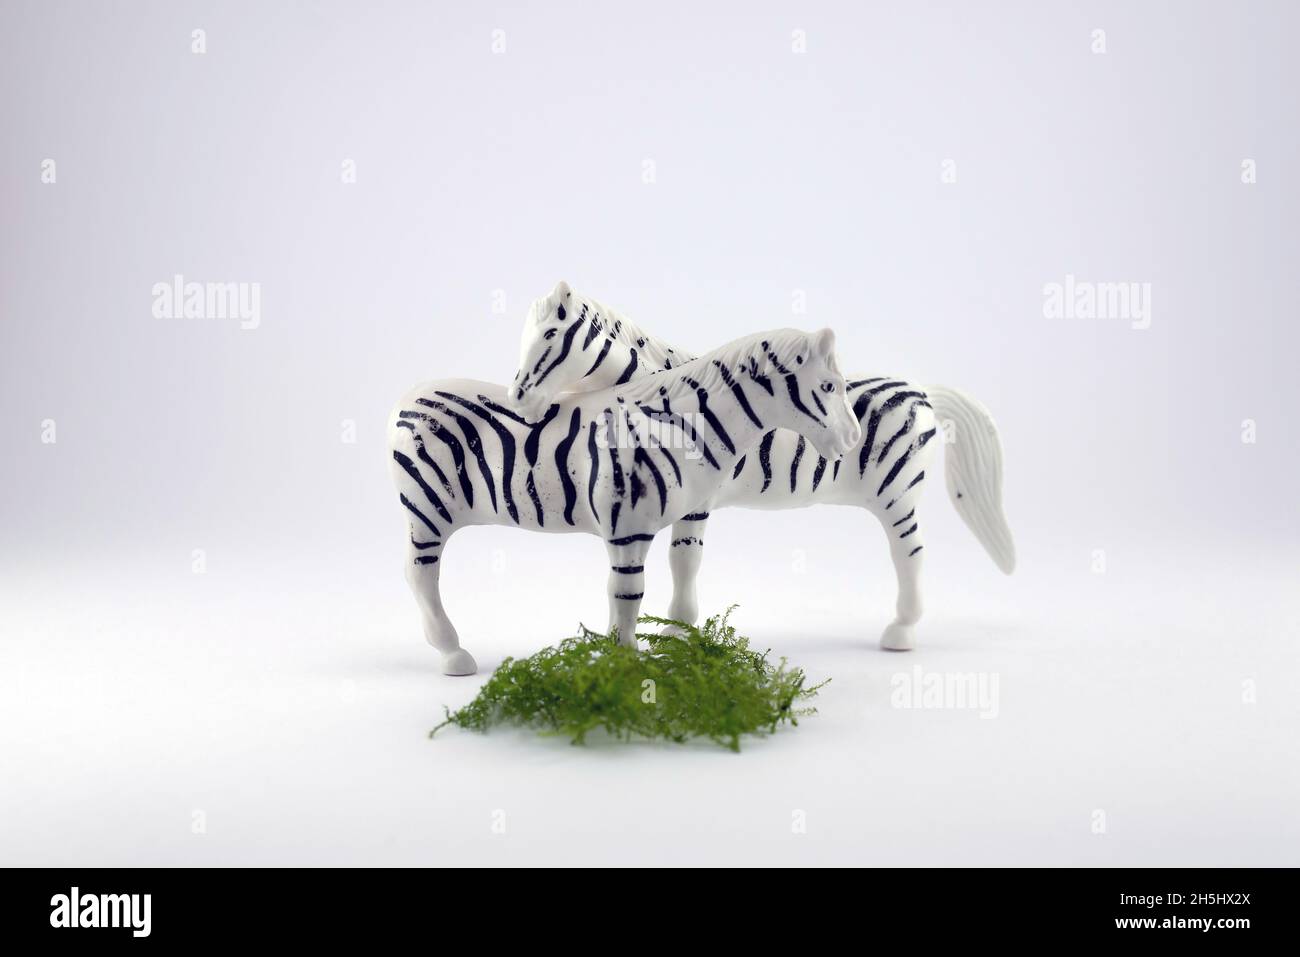 Icons of two embracing zebras on white background Stock Photo